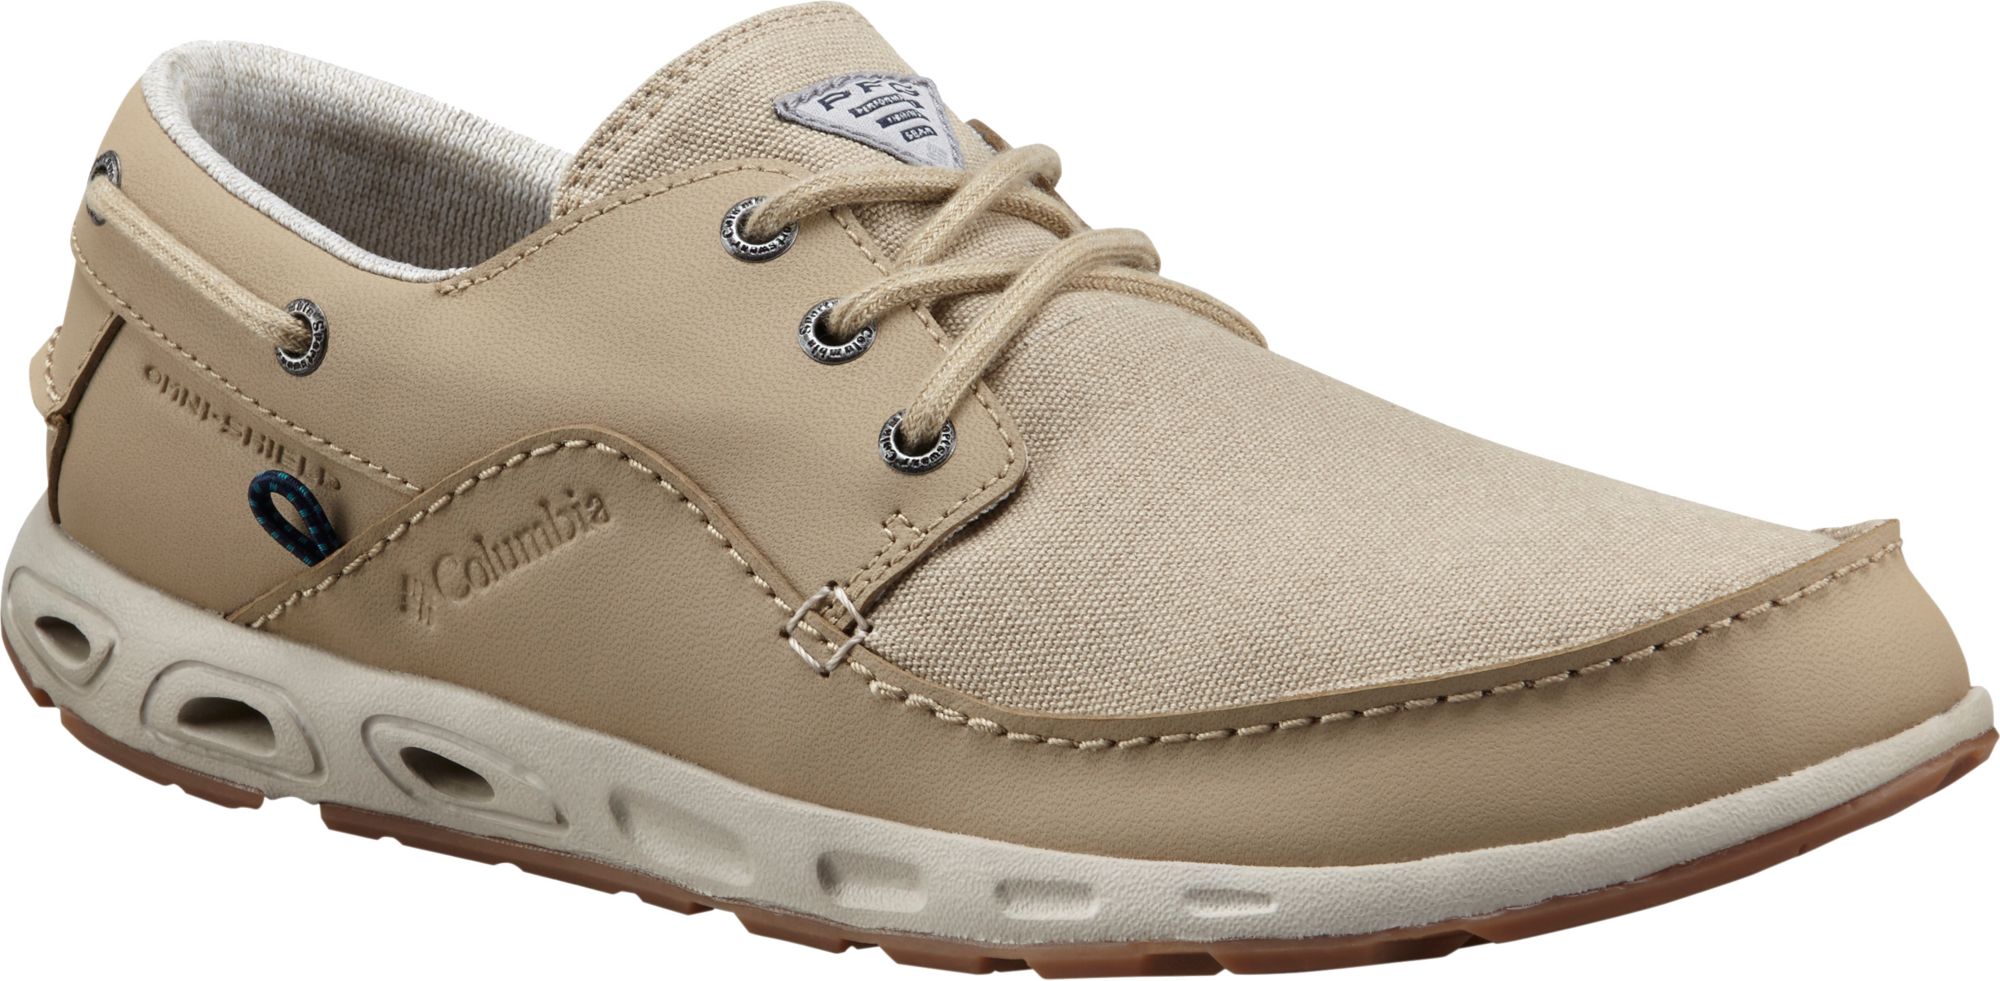 pfg water shoes